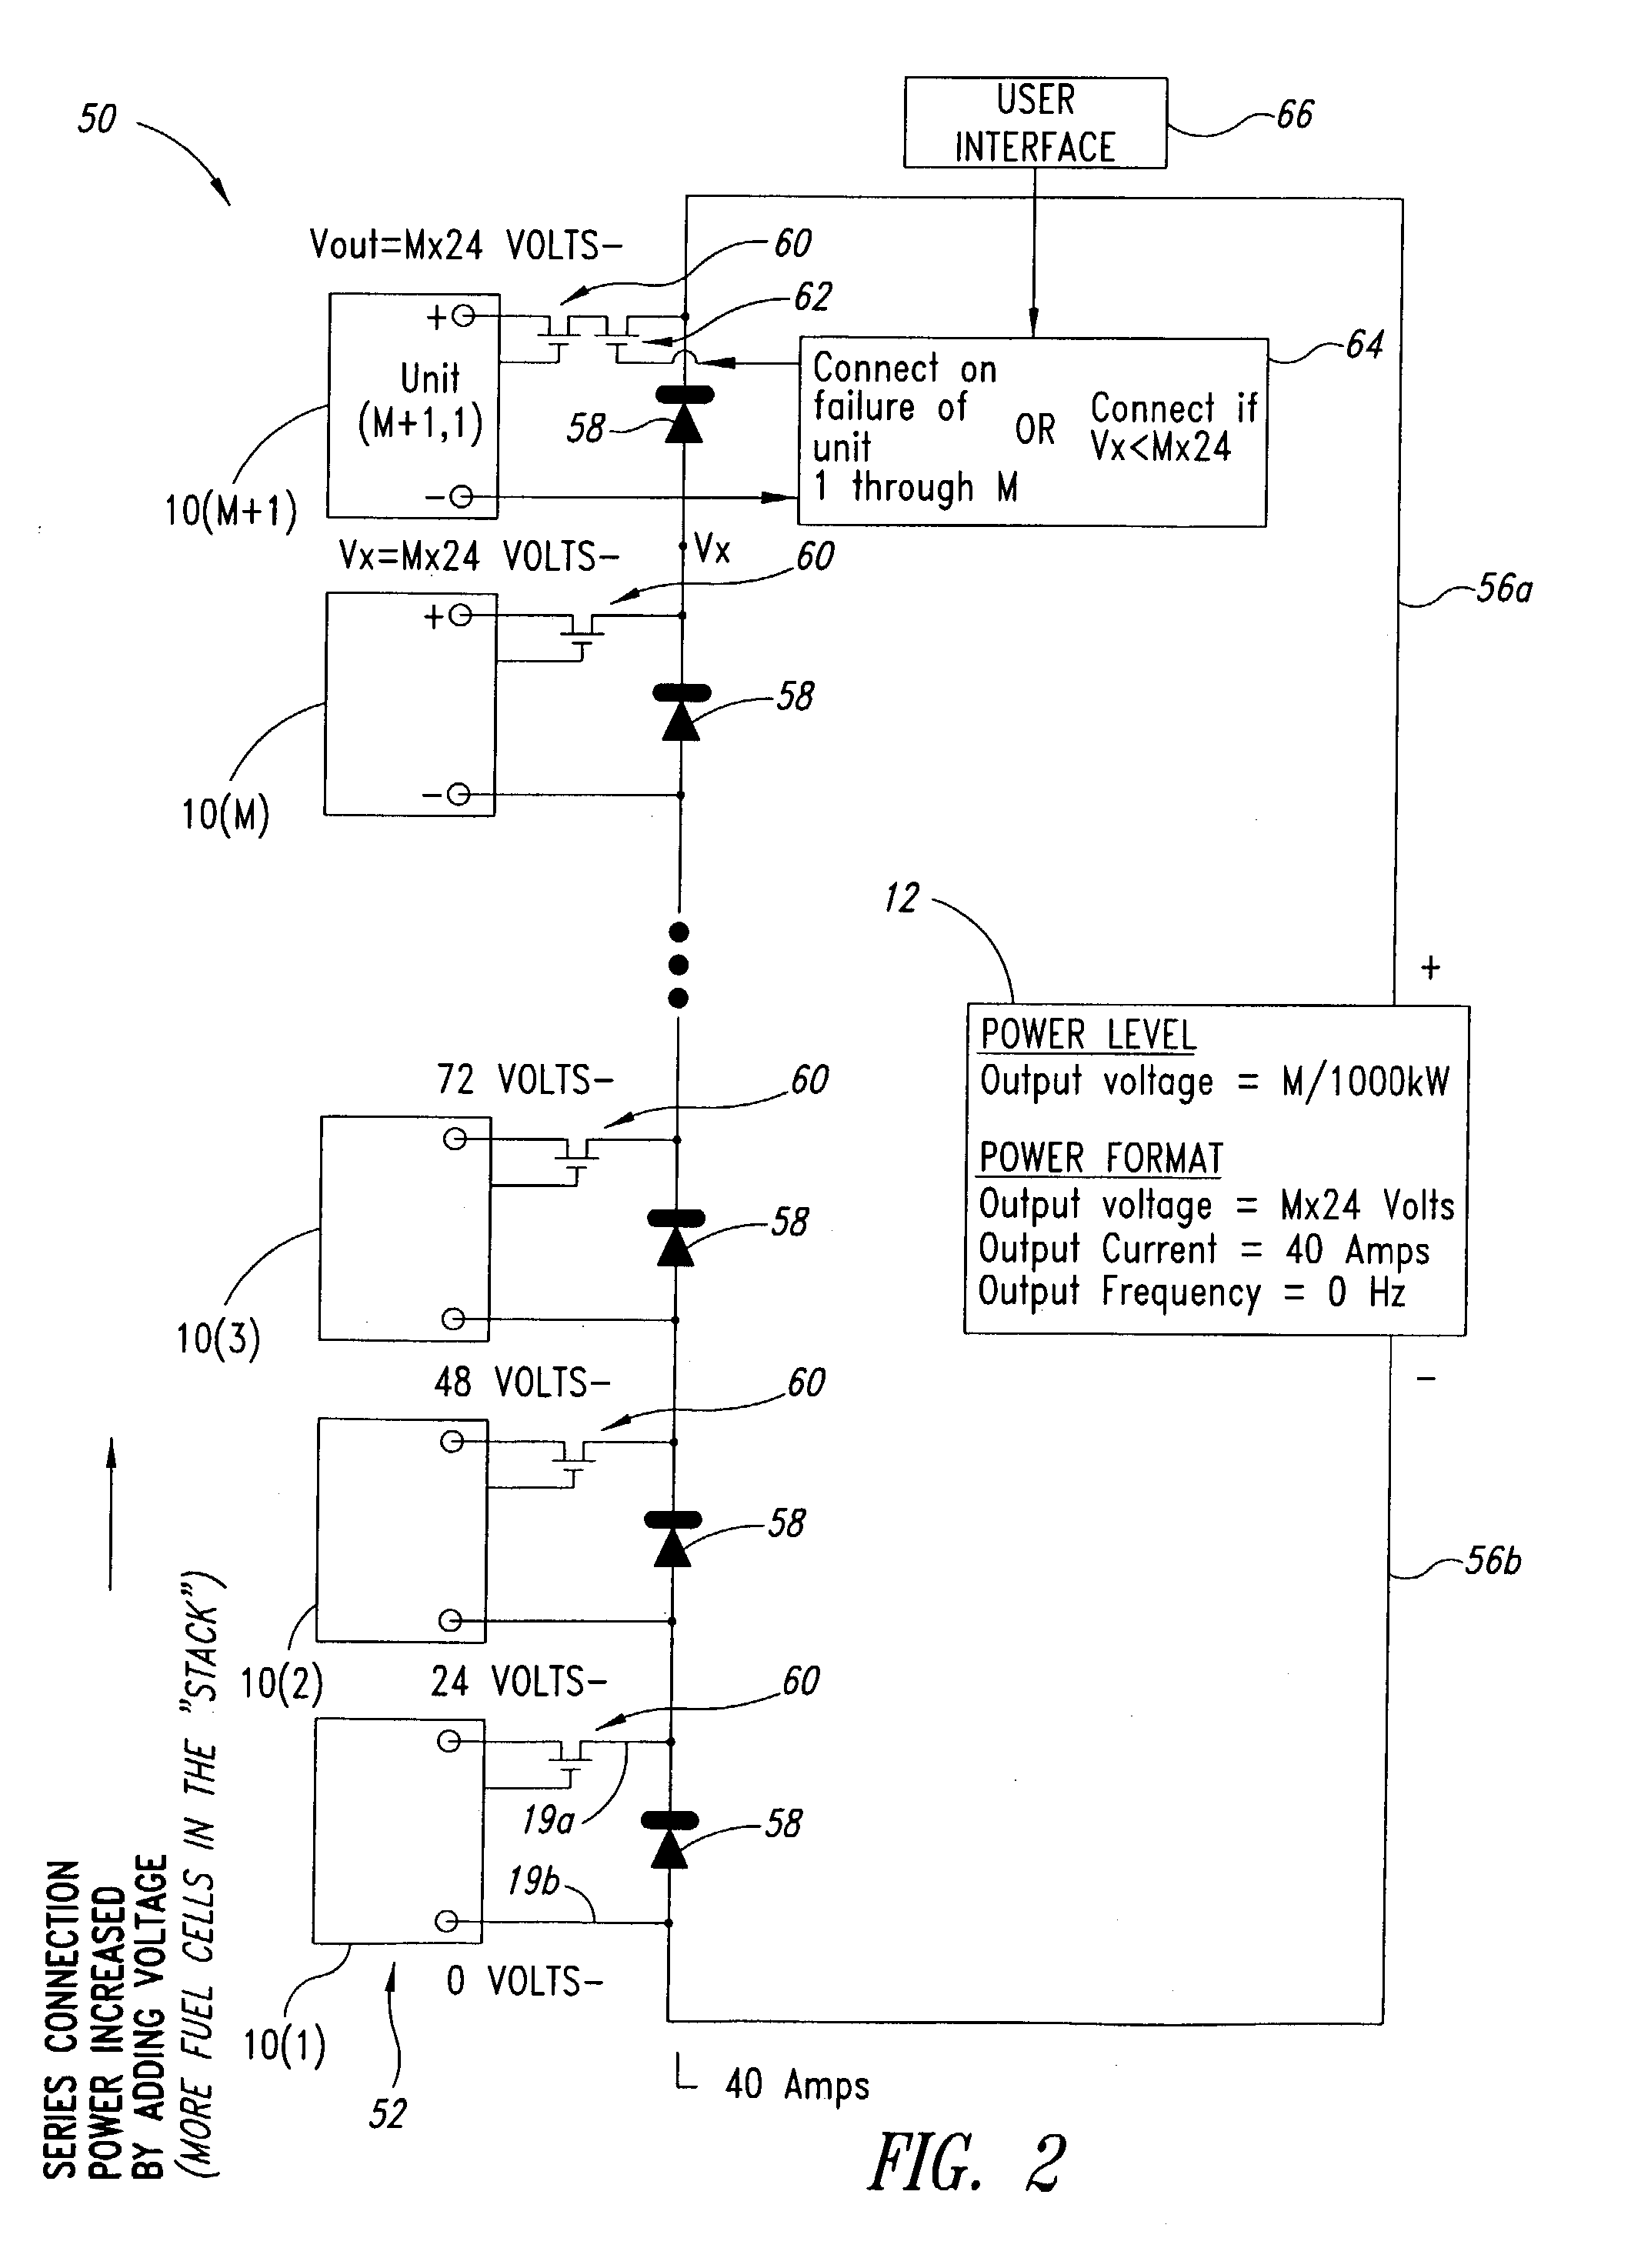 Power supplies and ultracapacitor based battery simulator